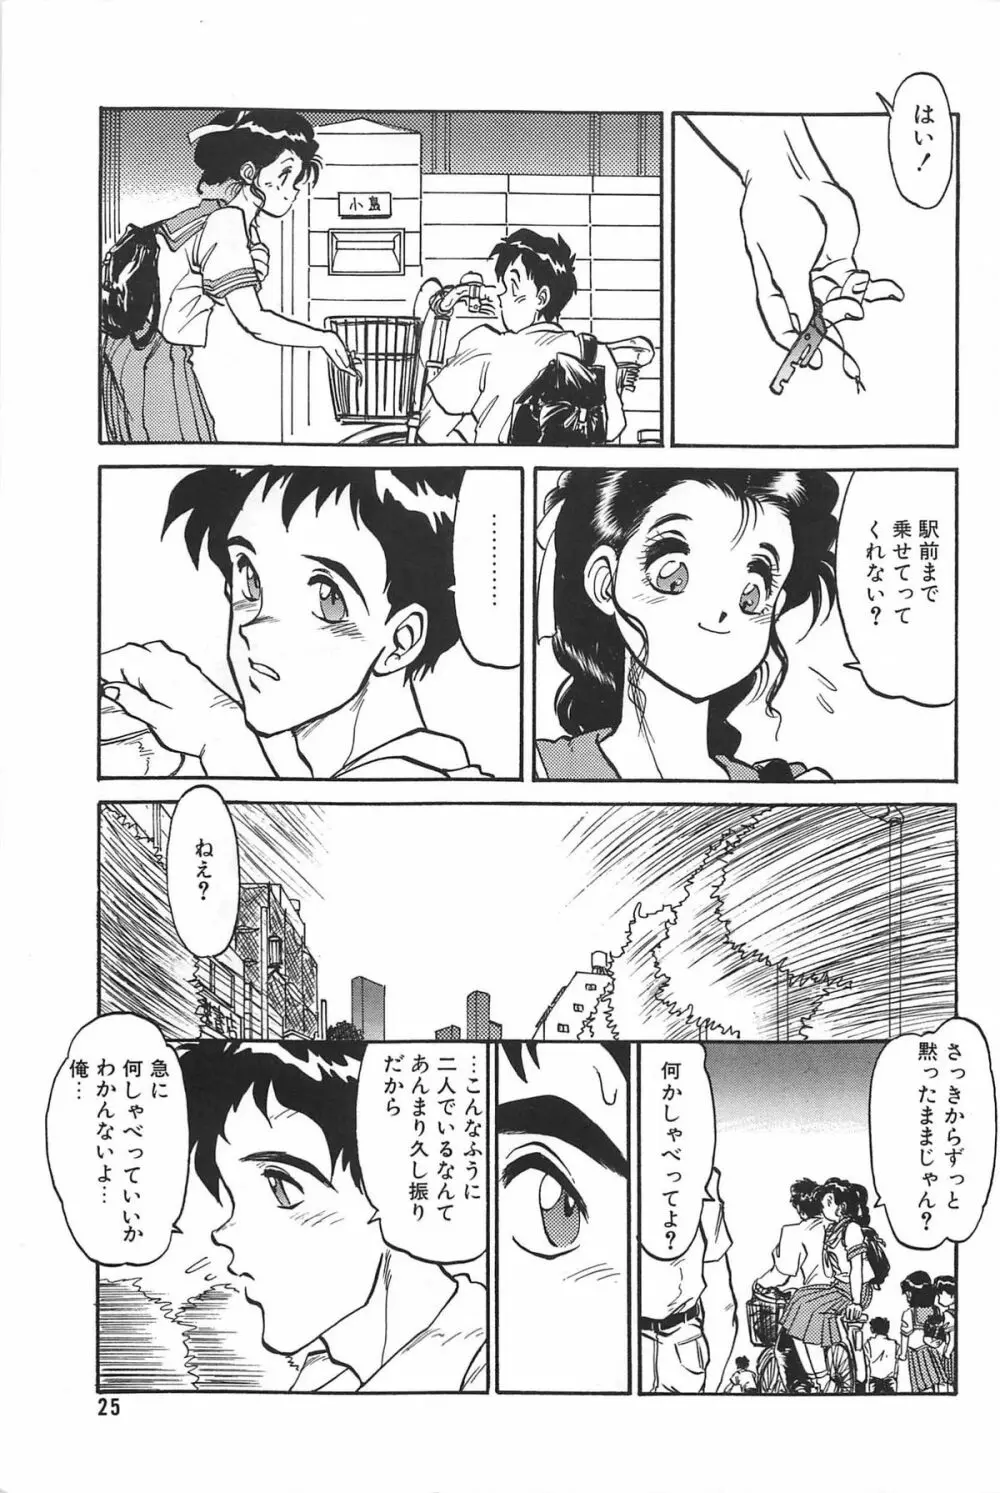 LOVE ME 1995 Page.27